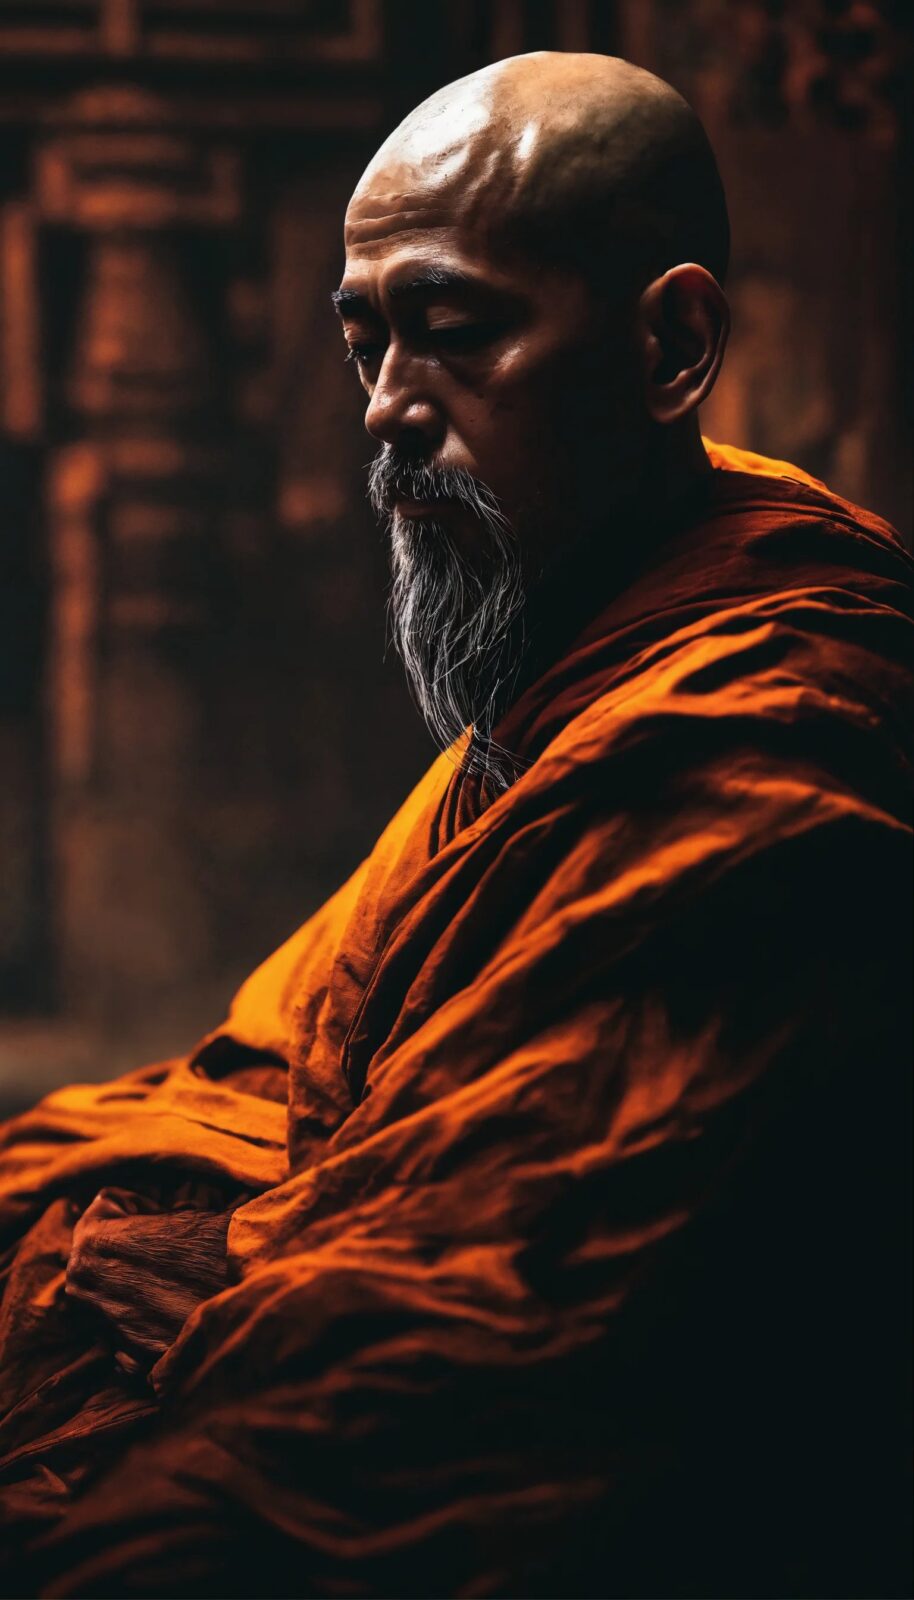 The Monk iPhone Wallpaper 4K | Free Download